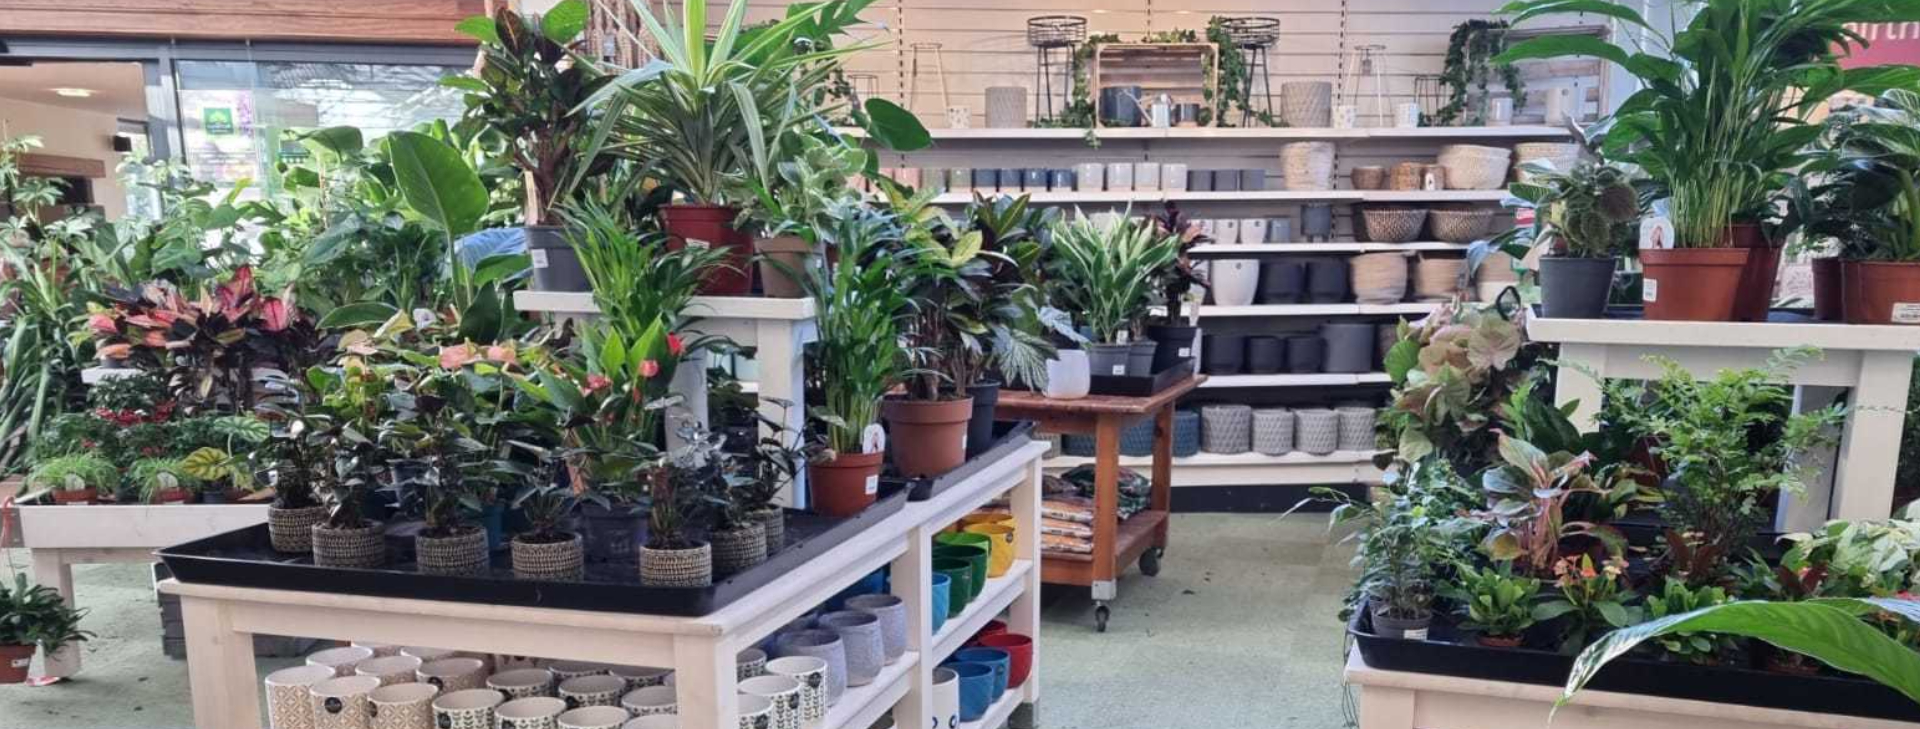 houseplants area and houseplant pots and accessories at earlswood garden centre guernsey